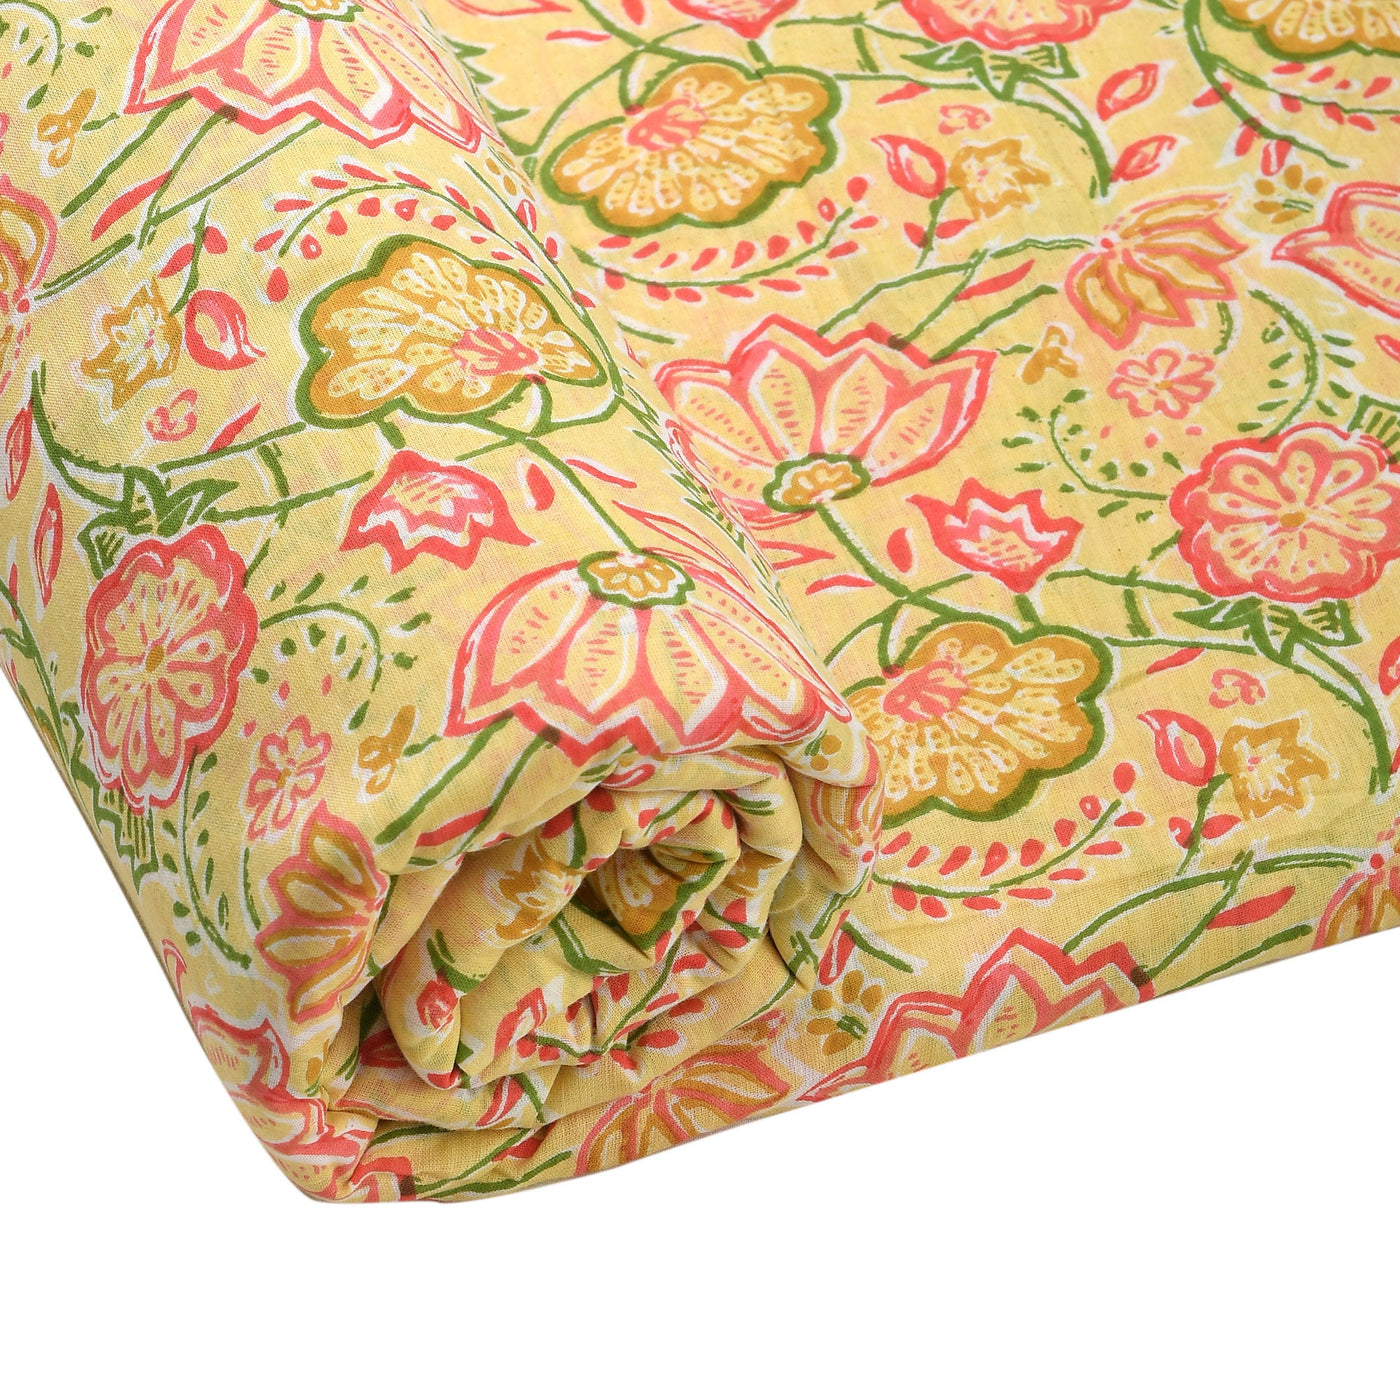 Banana Yellow, Punch Pink, Green Indian Floral Printed 100% Pure Cotton Cloth, Fabric by the yard, Women's Clothing Curtains Cushions Bags